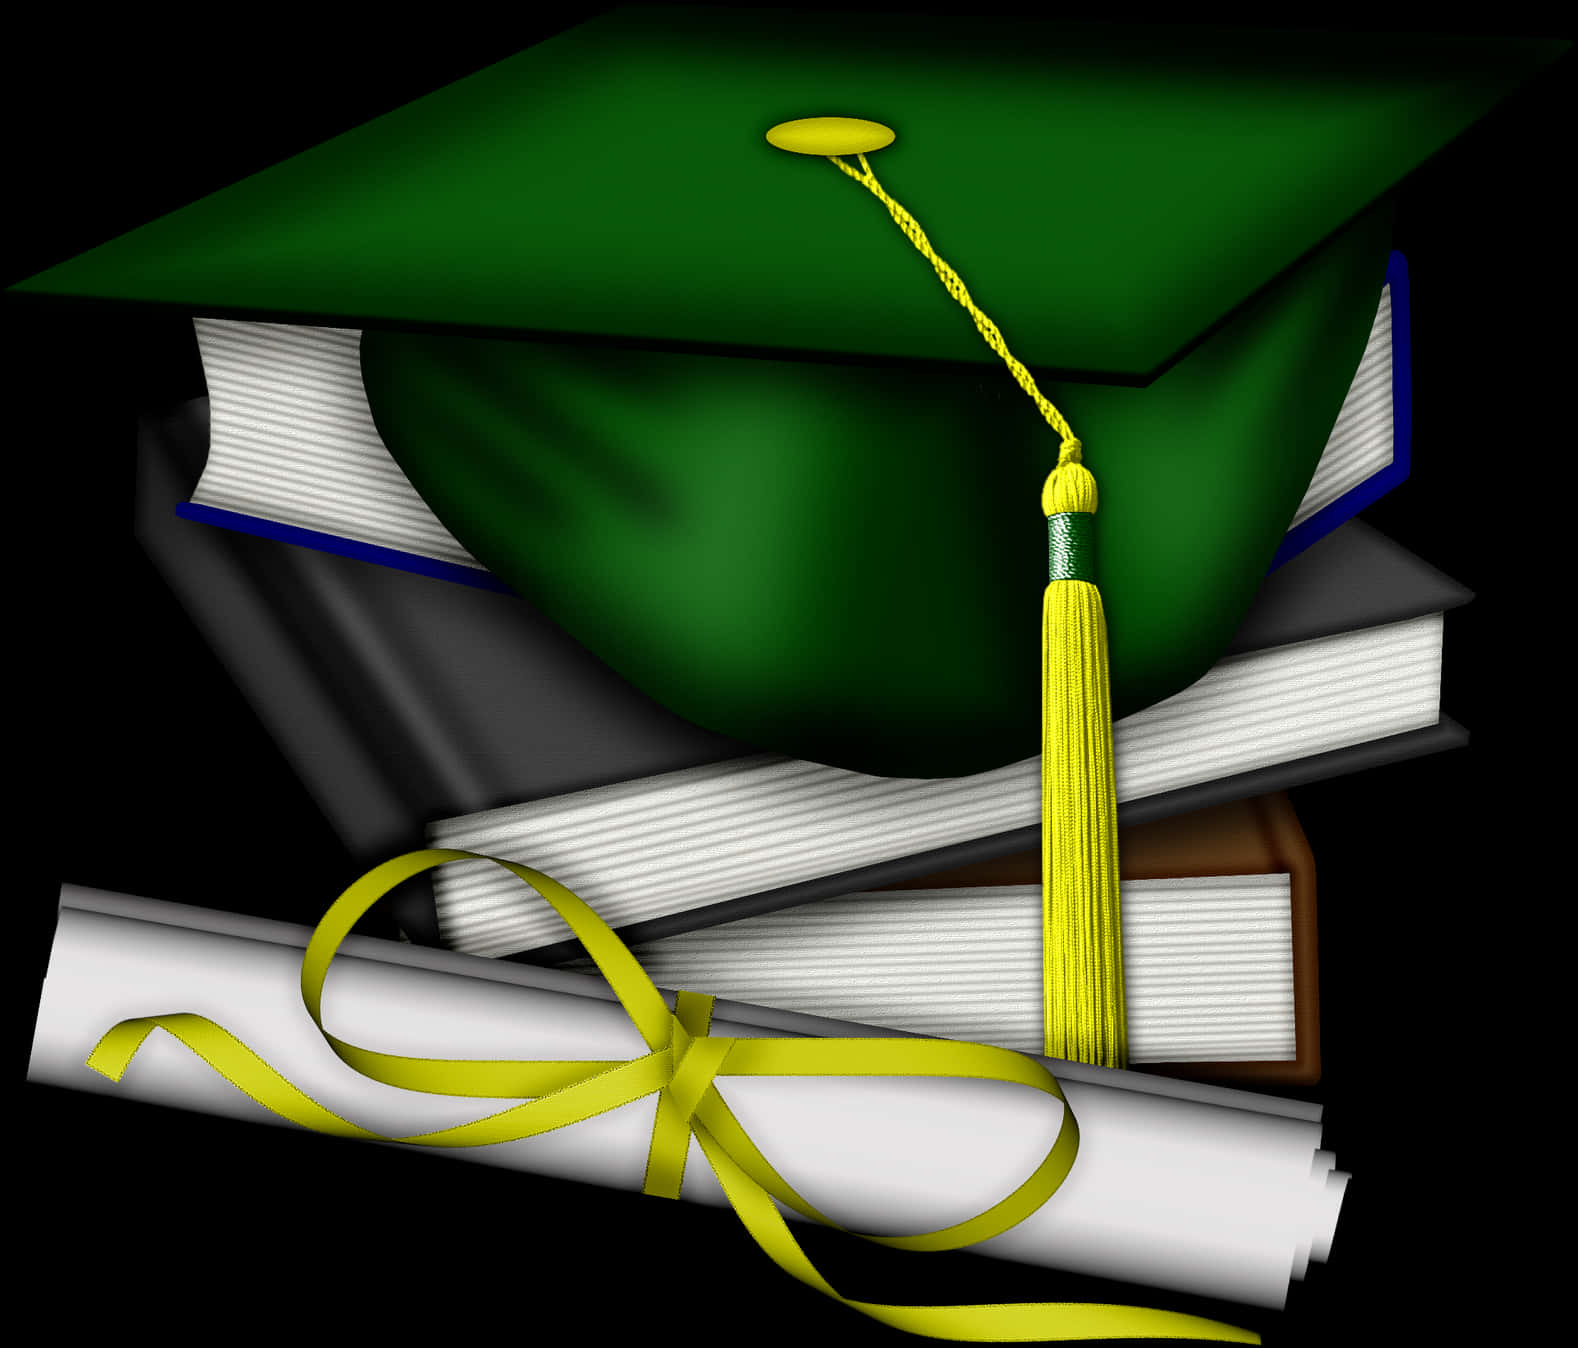 A Graduation Cap And Diploma On Top Of Books